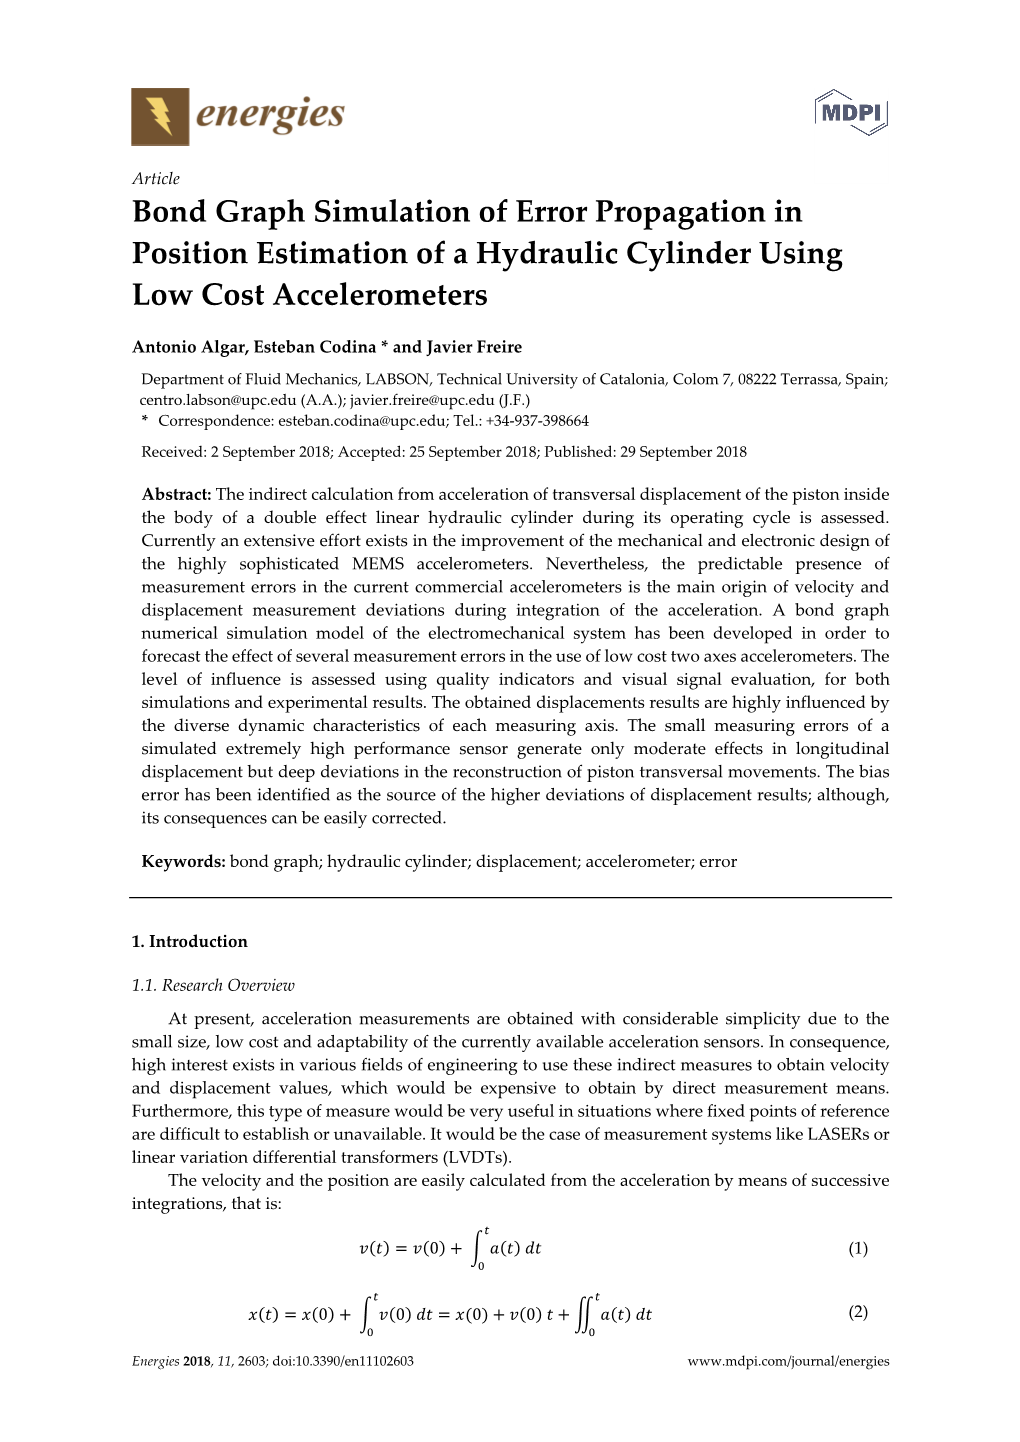 Bond Graph Simulation of Error Propagation in Position Estimation of a Hydraulic Cylinder Using Low Cost Accelerometers